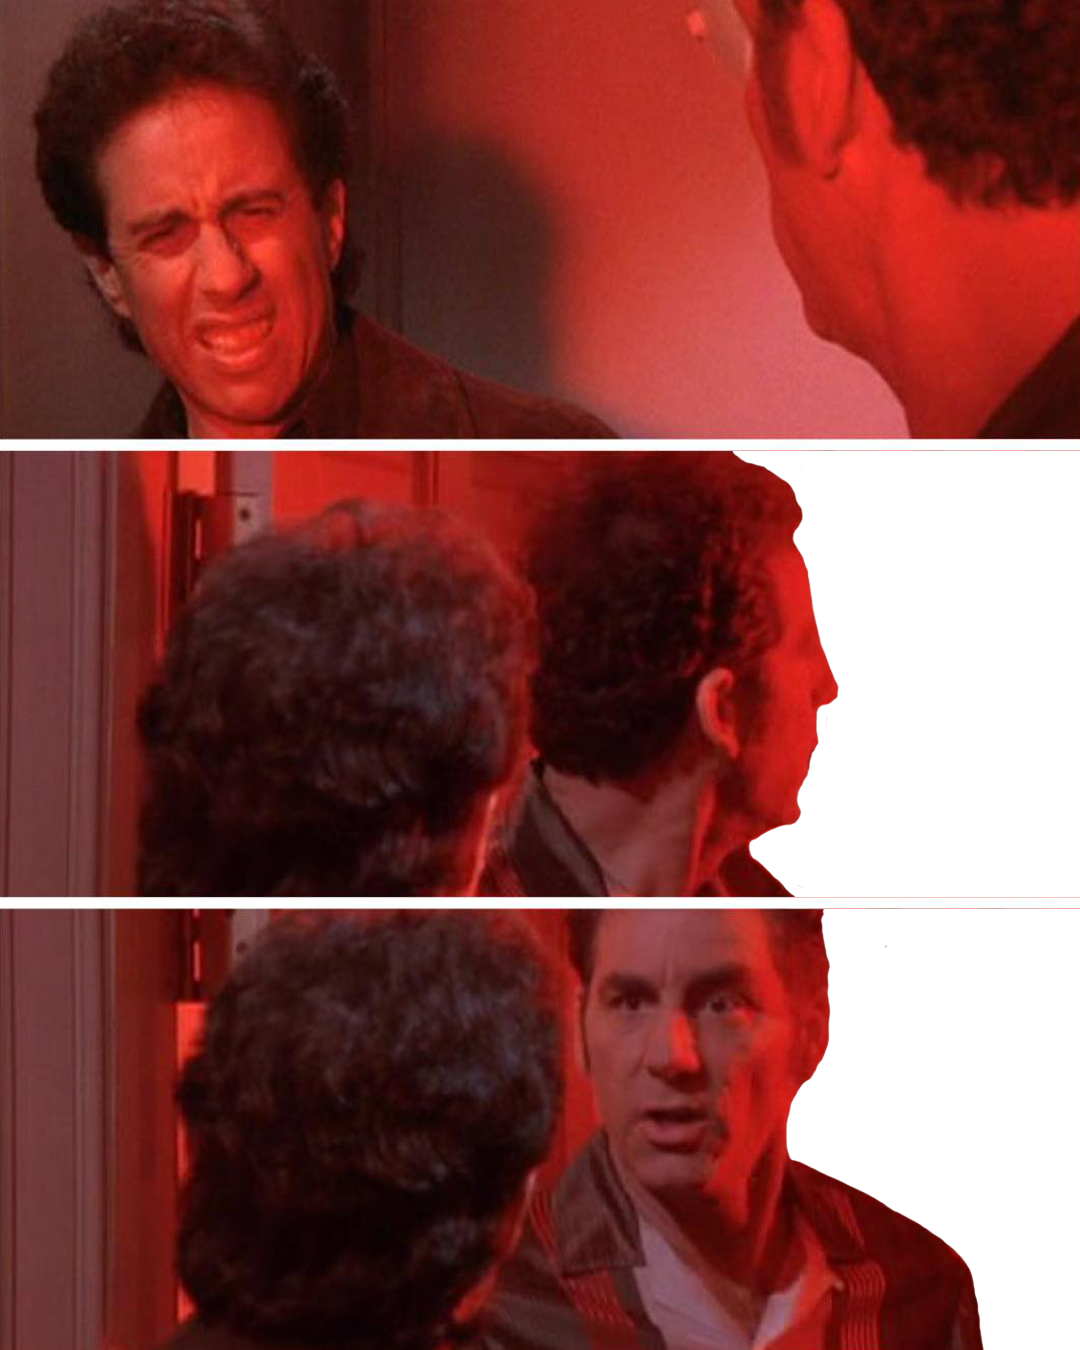 Kramer, what's going on in there? Blank Meme Template